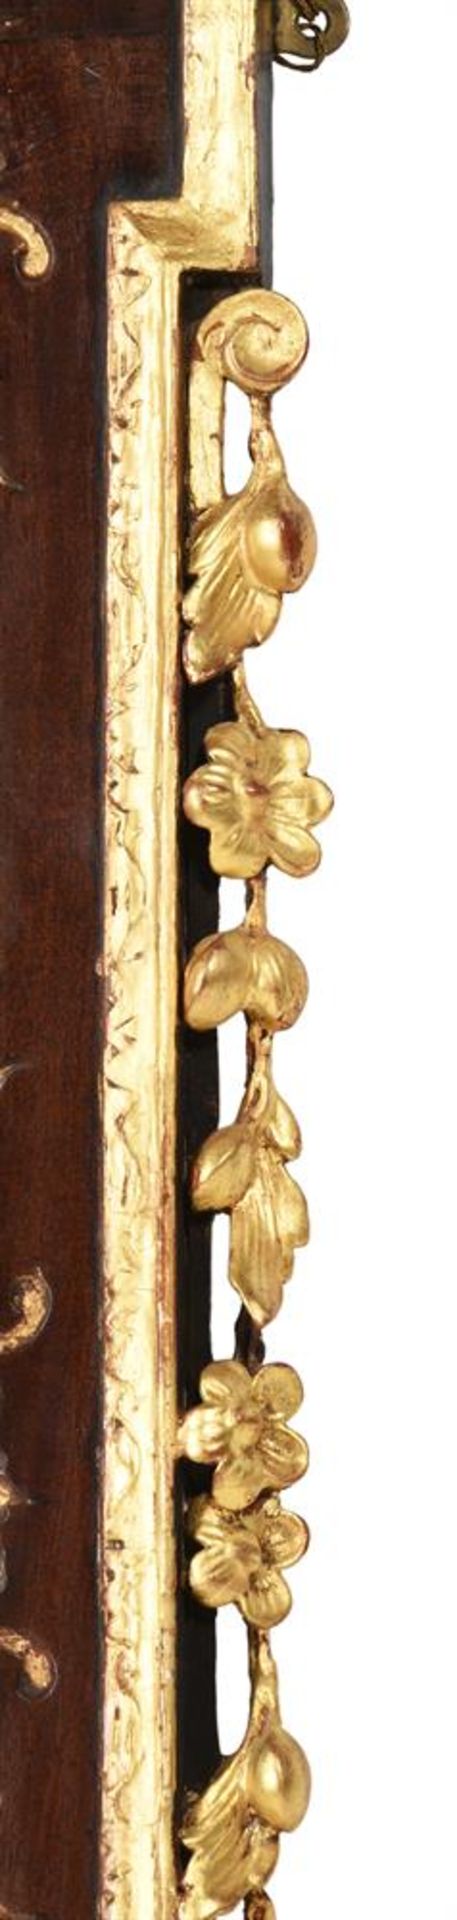 A GEORGE II MAHOGANY AND PARCEL GILT WALL MIRROR, CIRCA 1740 - Image 3 of 4